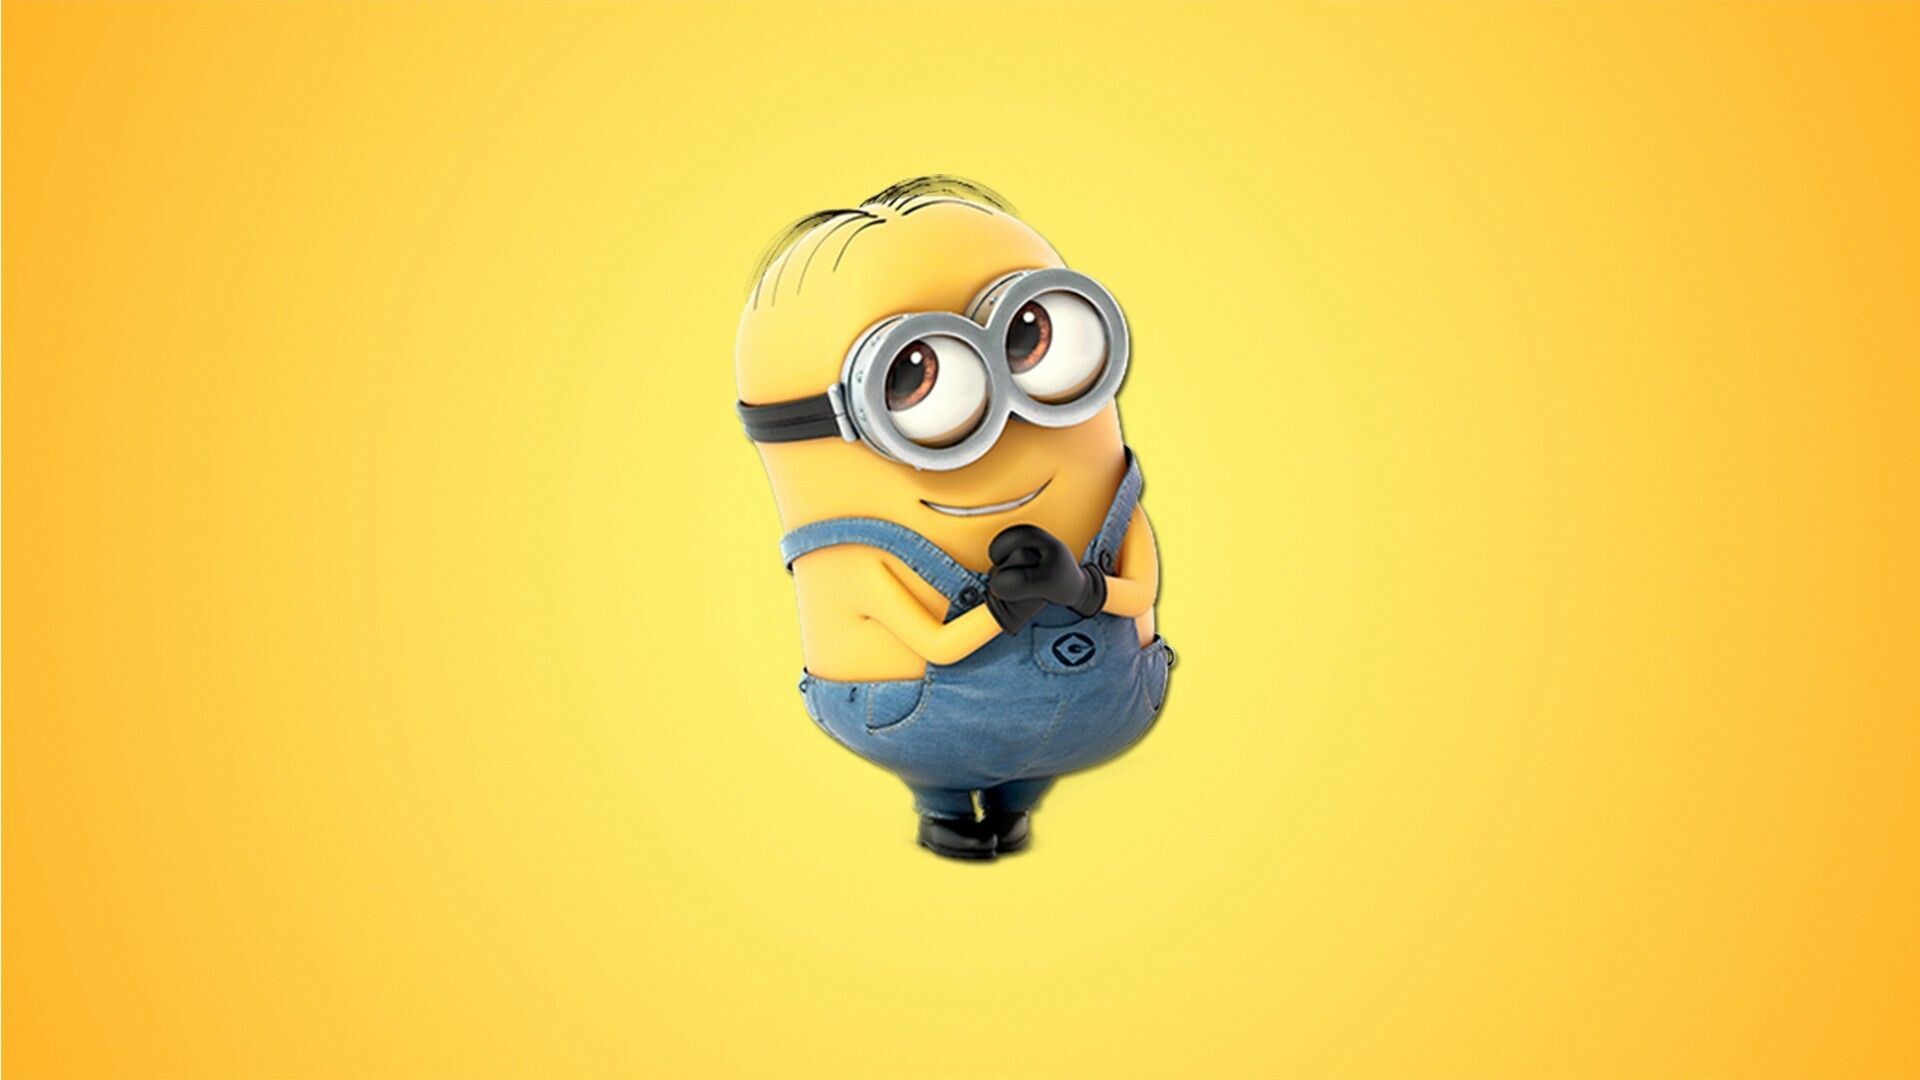 Minions: The Rise of Gru: Stuart, Minion, Appears in the Despicable Me franchise. 1920x1080 Full HD Wallpaper.